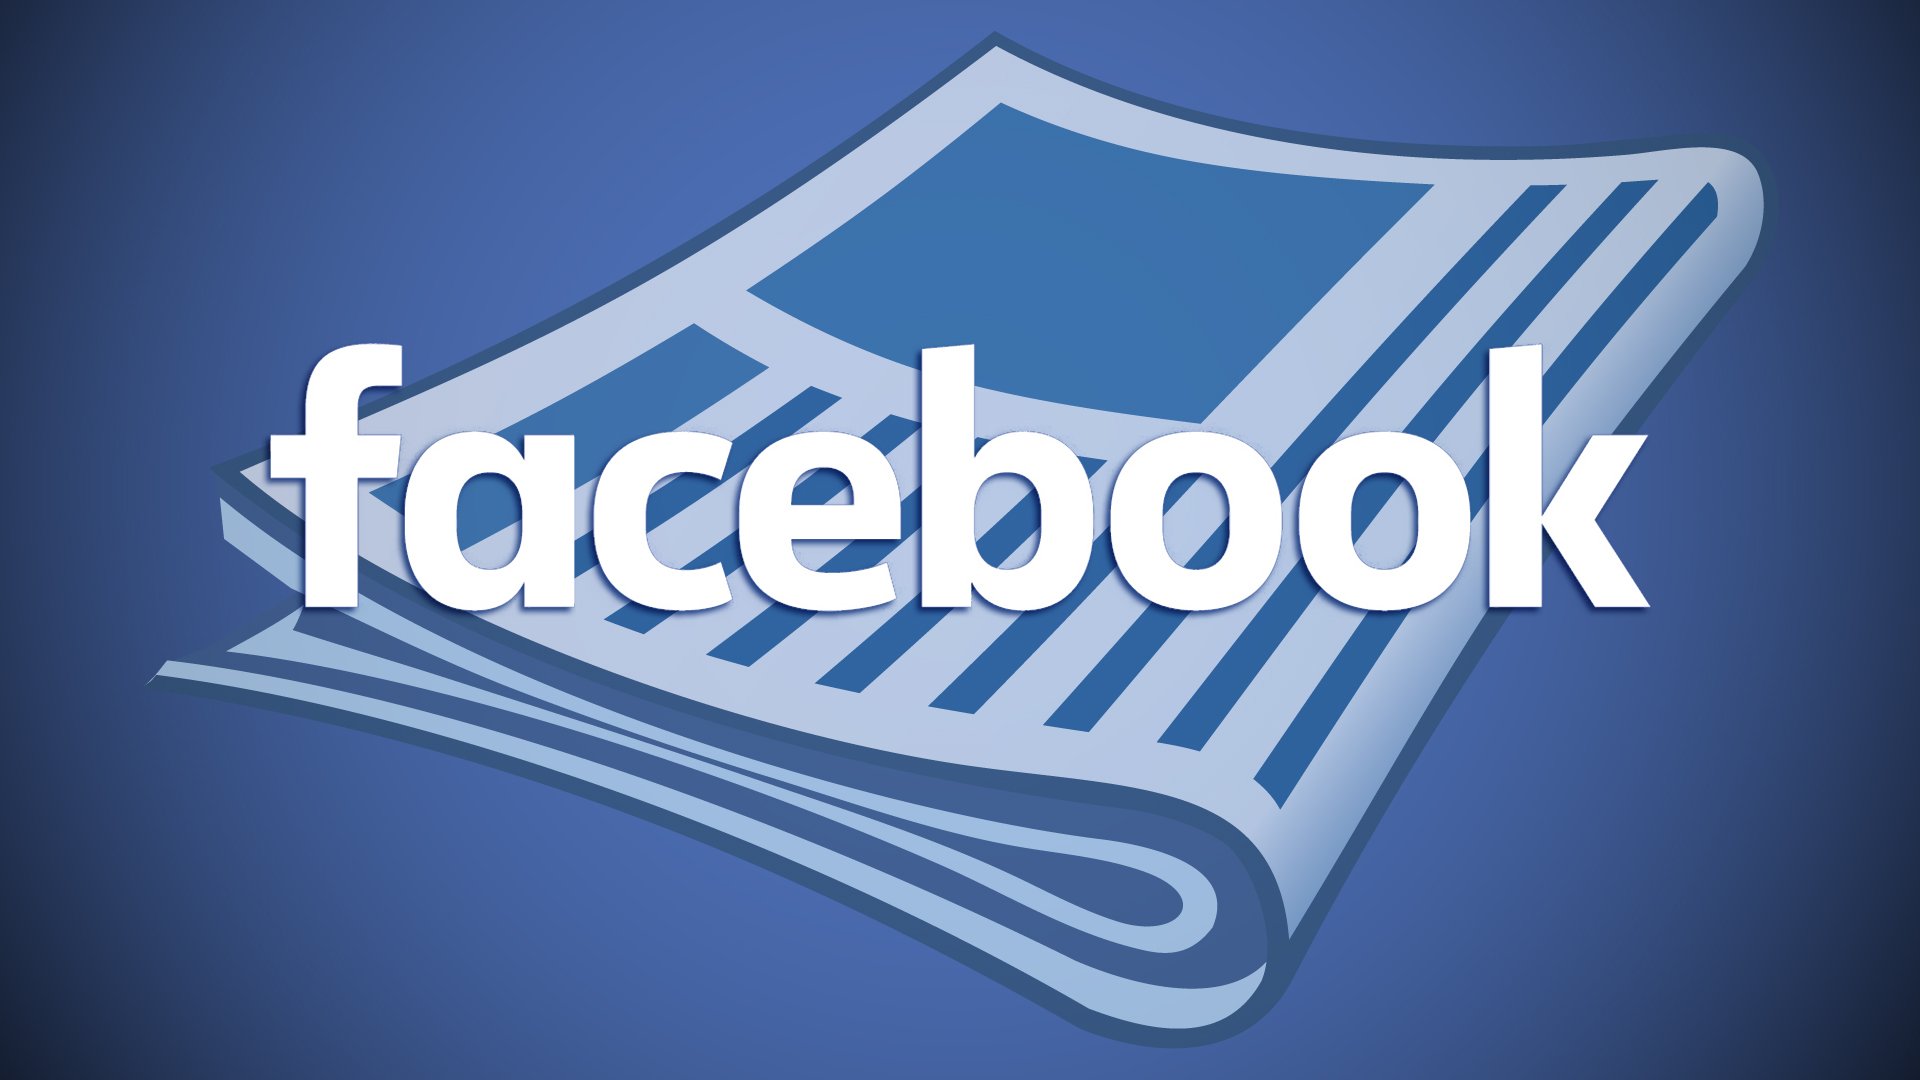 Facebook Account Increase Weight Tool for Facebook Marketing